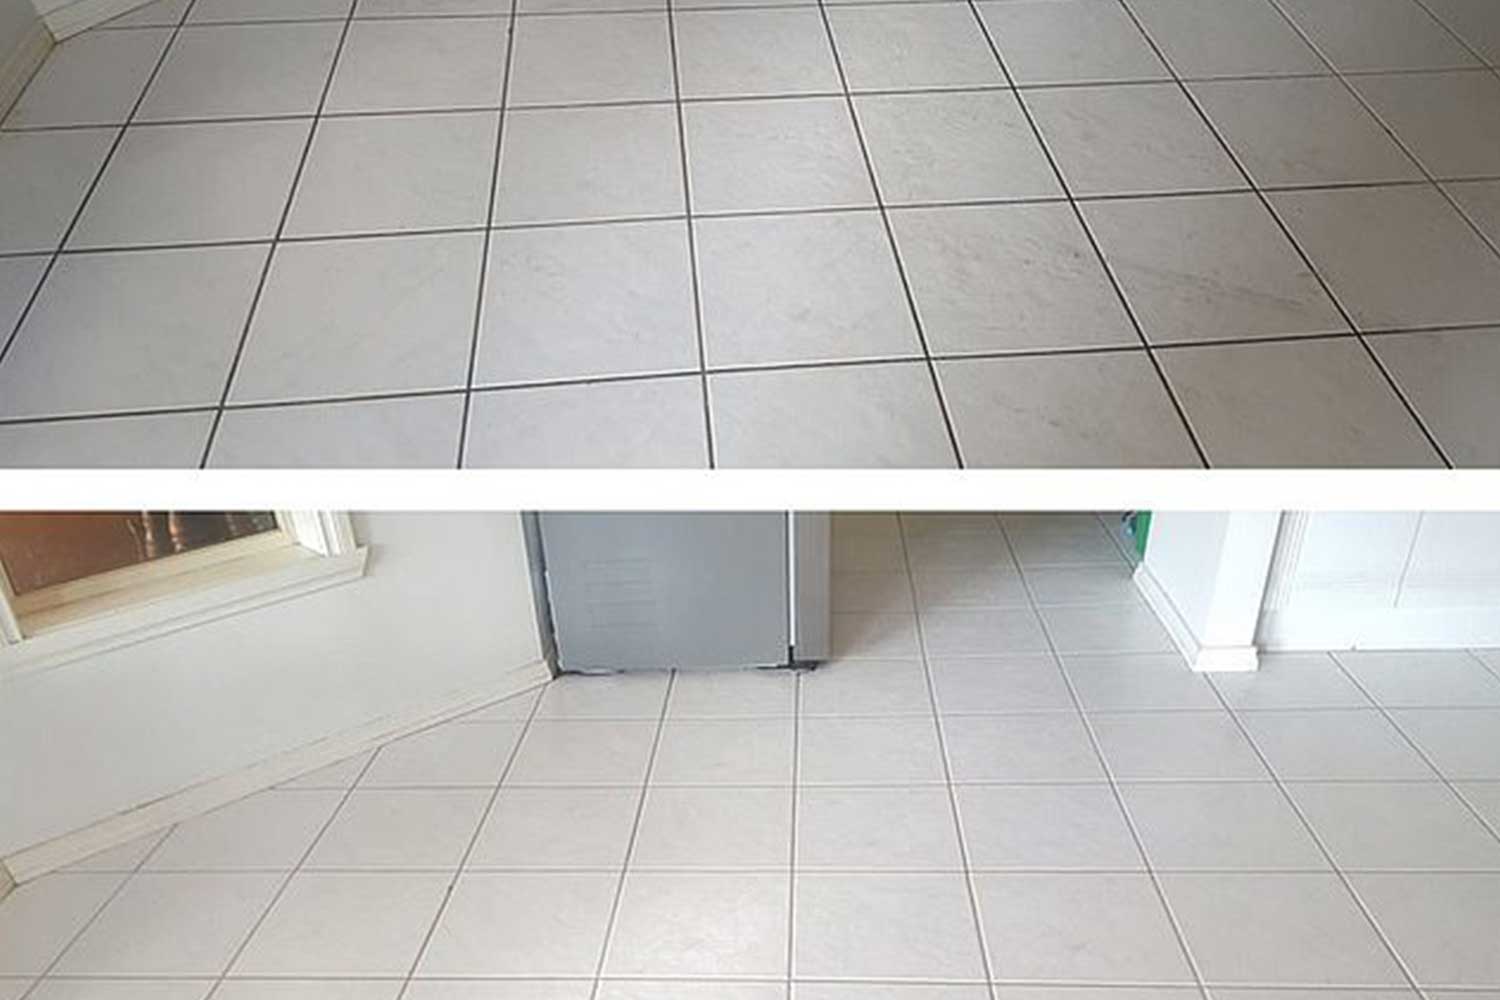 Professional cleaner reveals grout cleaning hack  Better Homes